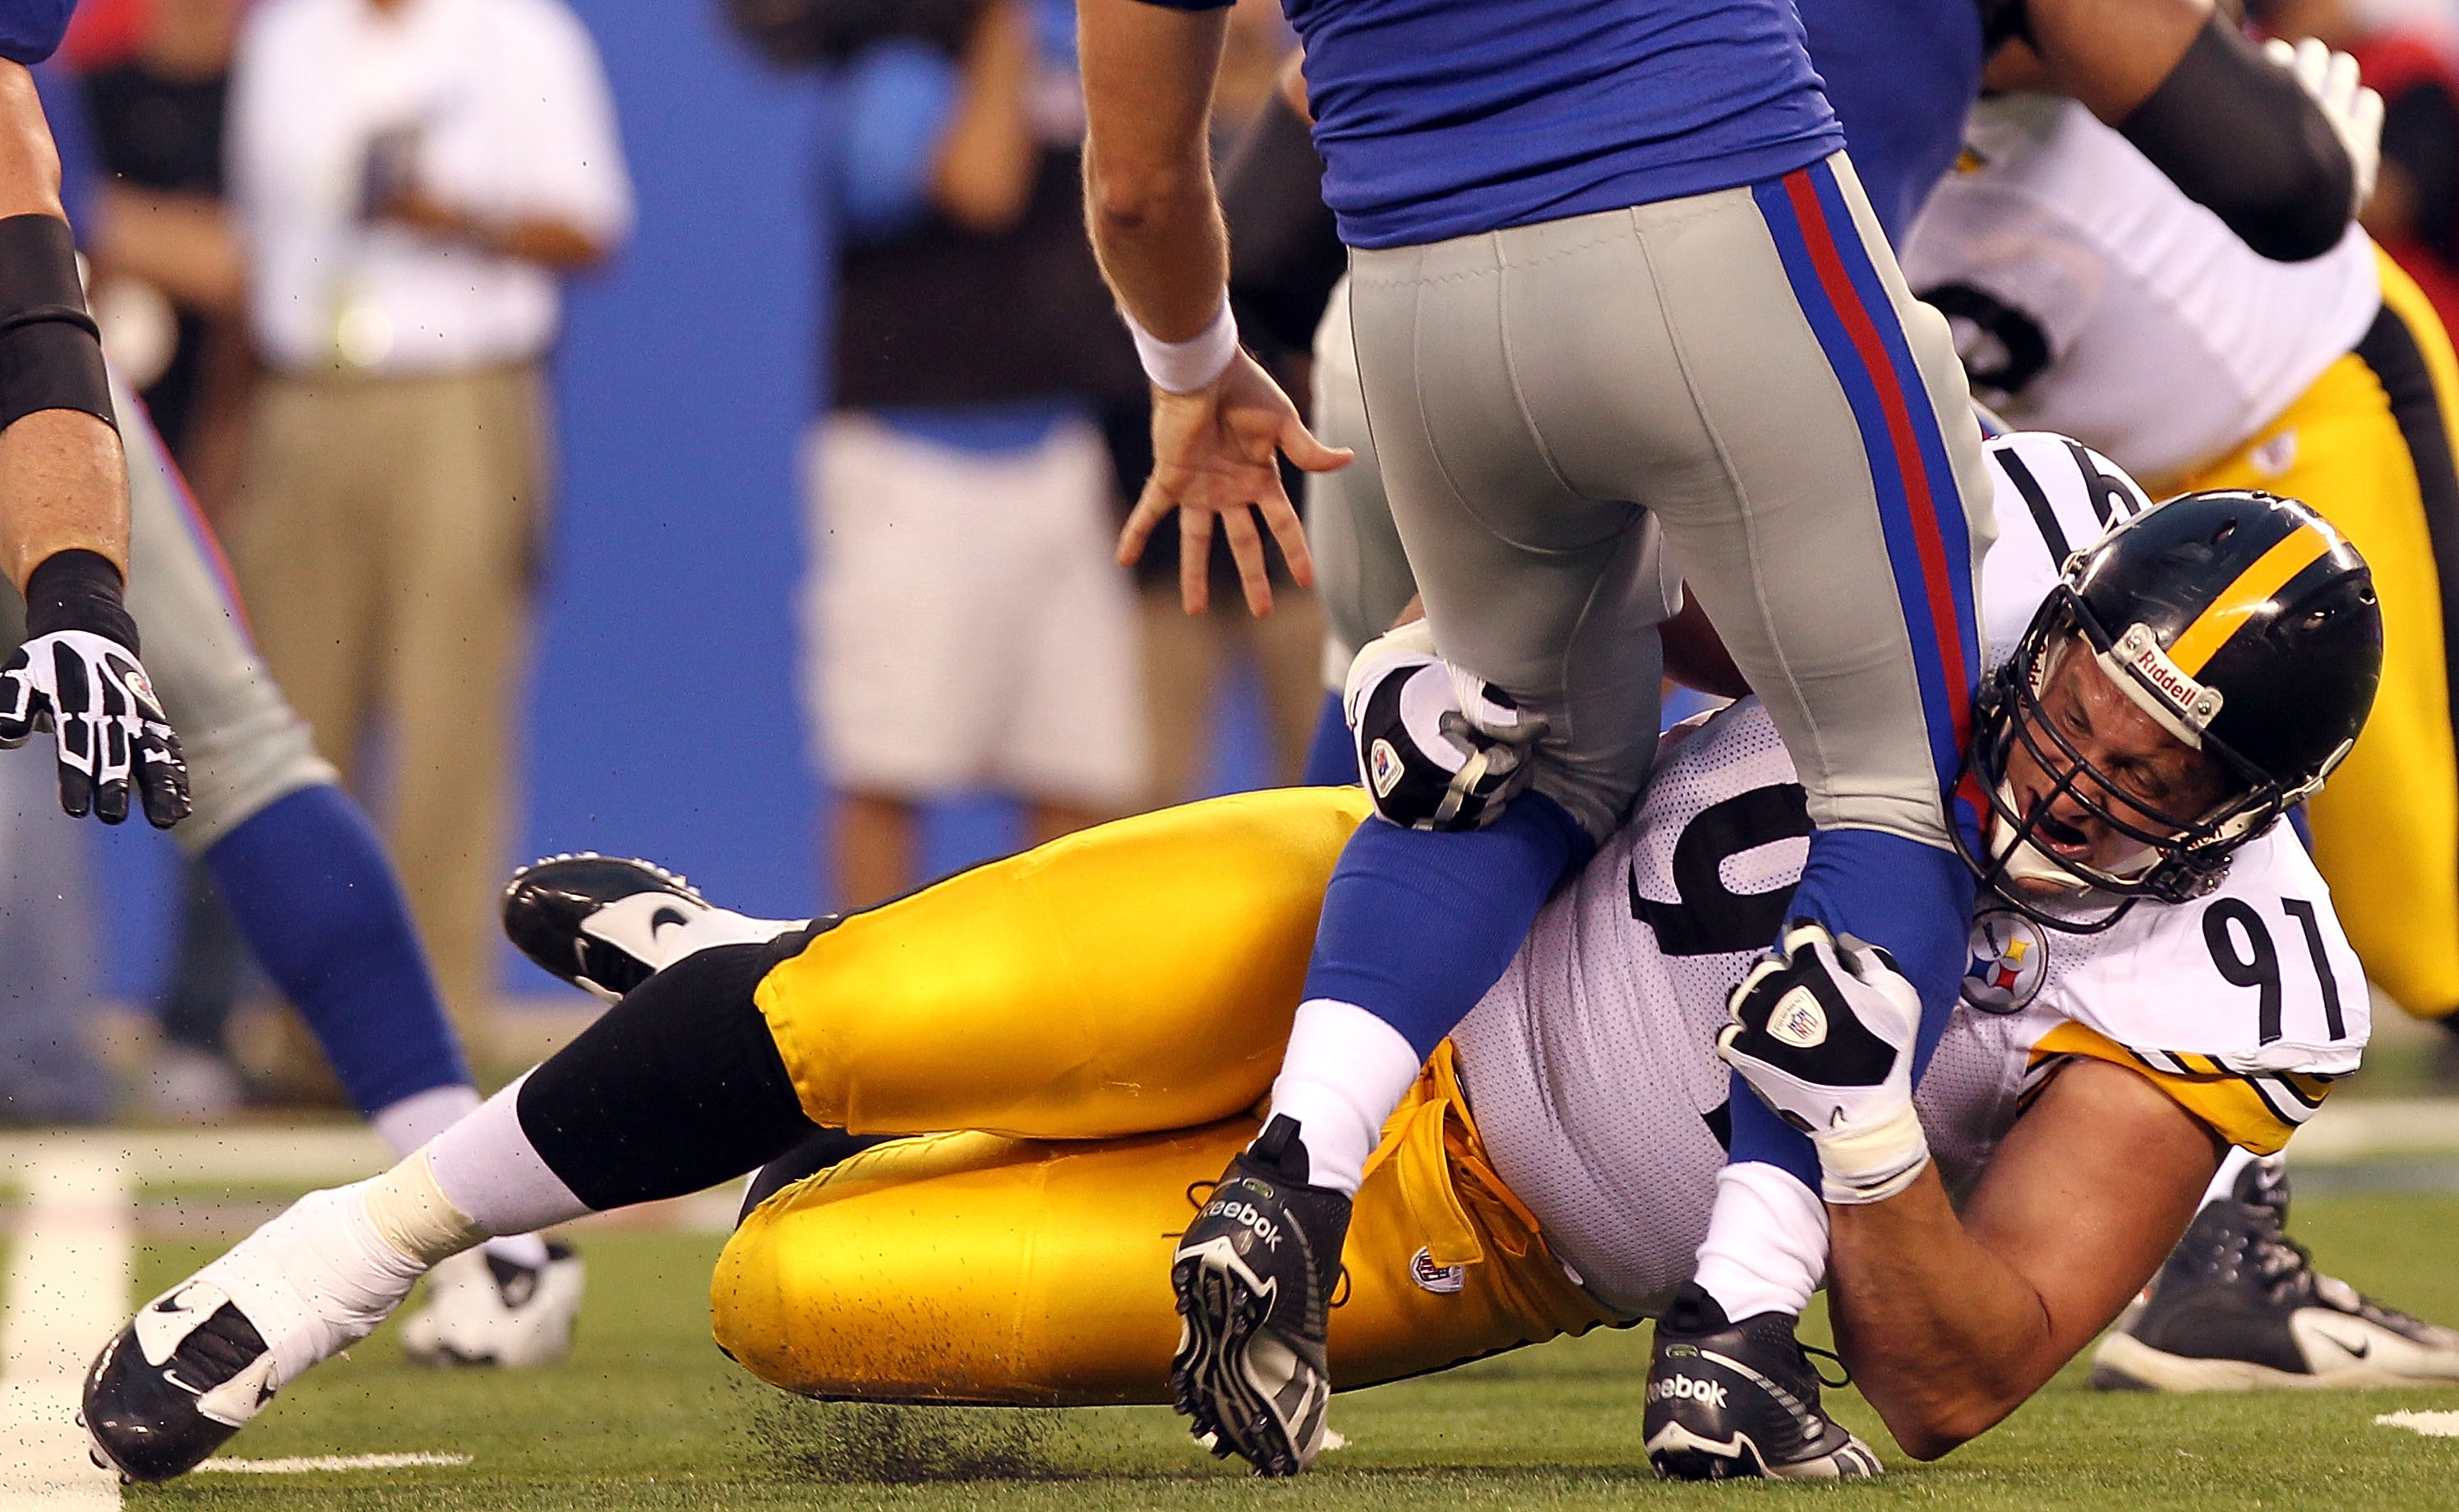 EAST RUTHERFORD, NJ - AUGUST 21: Aaron Smith #91 of the Pittsburgh Steelers makes a tackle against the New York Giants during their preseason game at New Meadowlands Stadium on August 21, 2010 in East Rutherford, New Jersey.  (Photo by Nick Laham/Getty Im